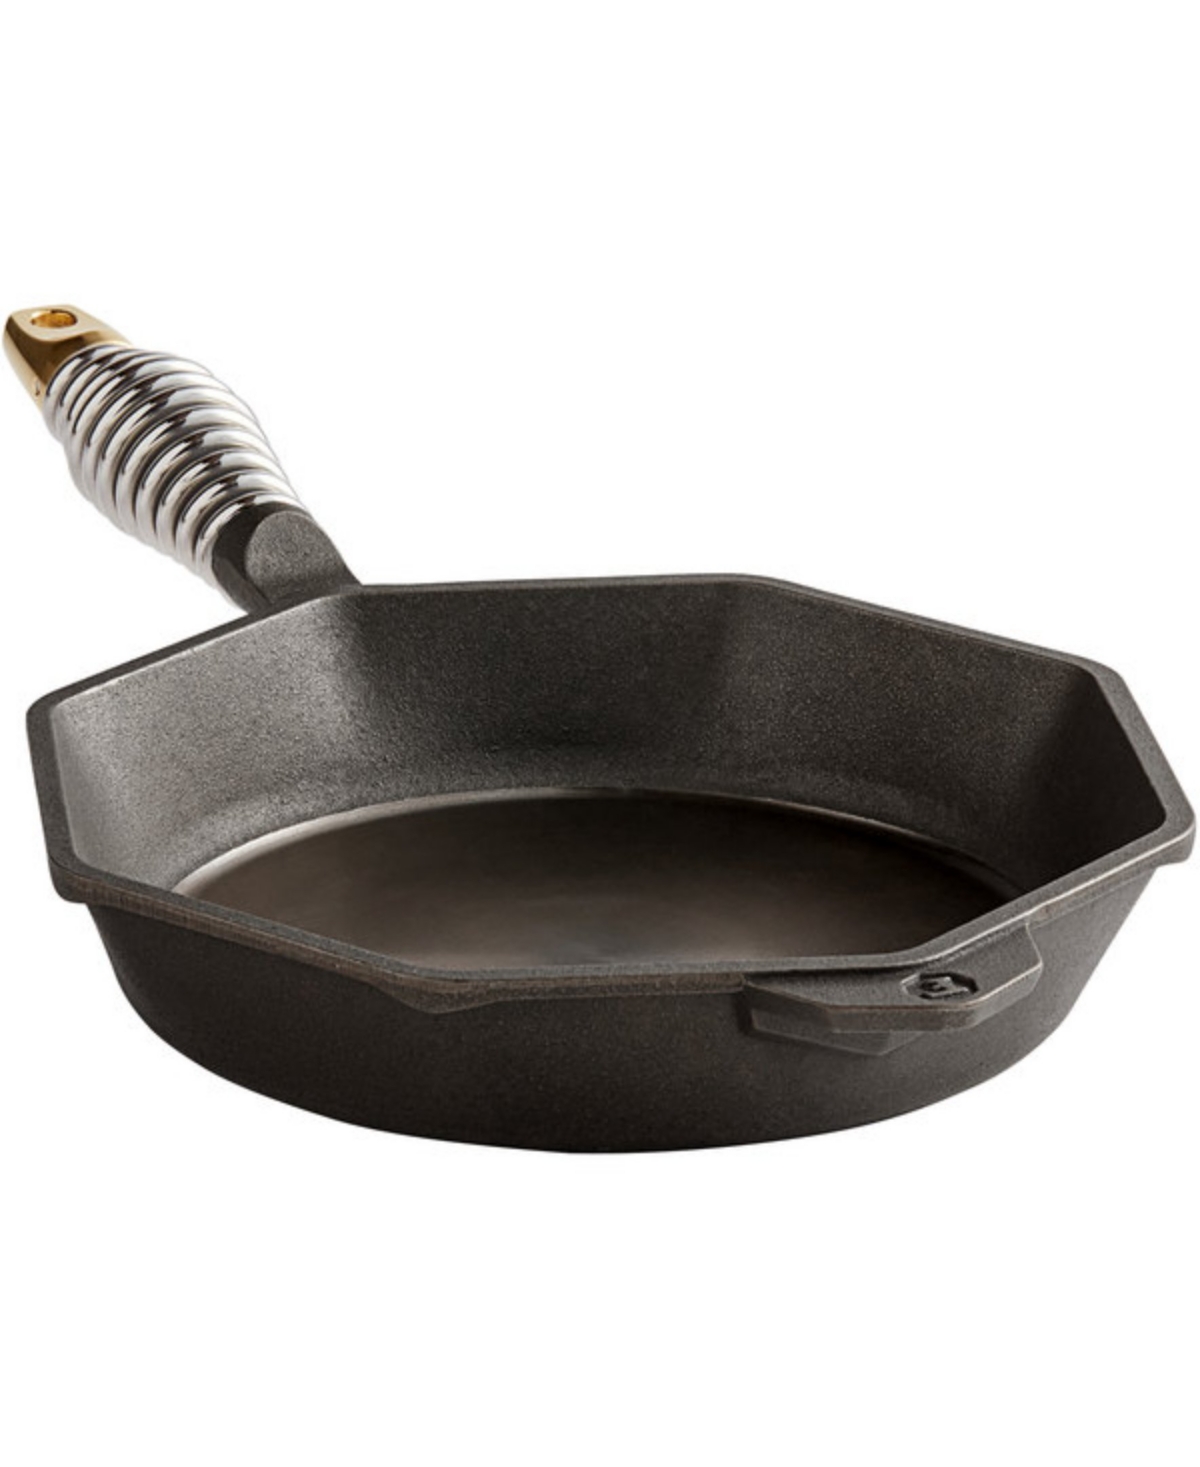 Lodge Cast Iron Finex 10" Skillet Cookware In Black